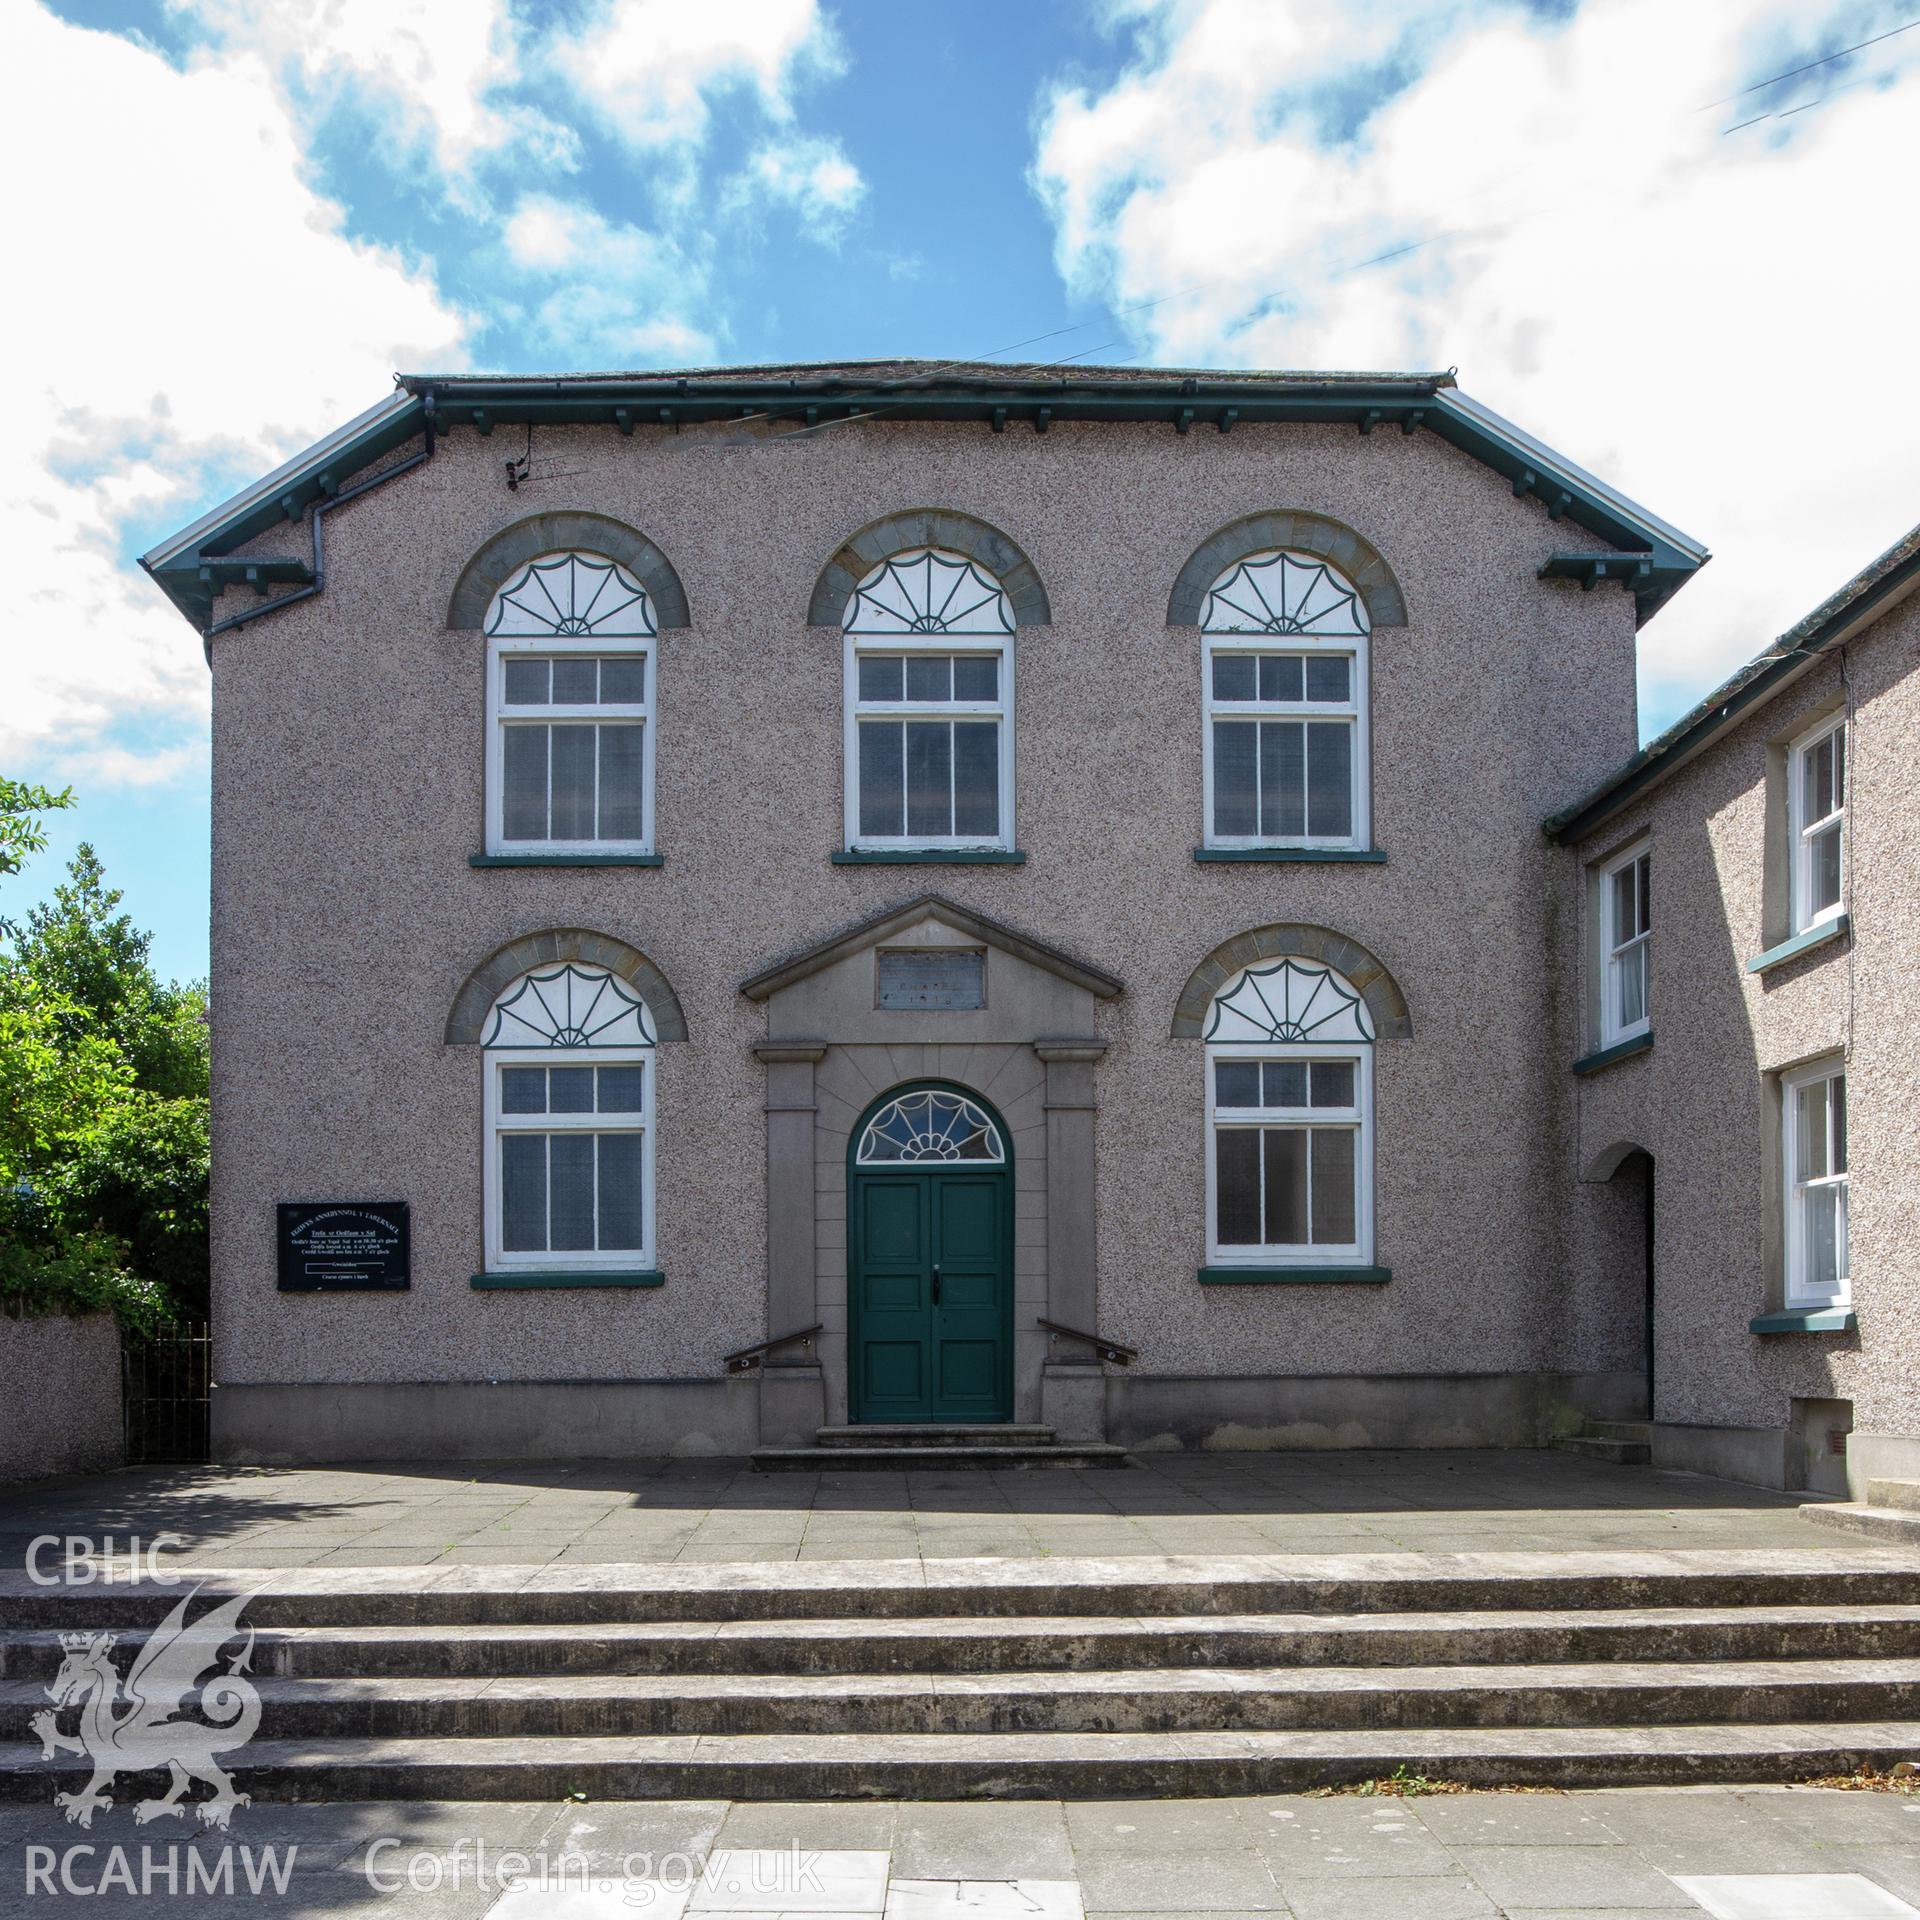 Colour photograph showing front elevation and entrance of Tabernacl Welsh Independent Chapel, Park Street, Upper Fishguard. Photographed by Richard Barrett on 22nd June 2018.